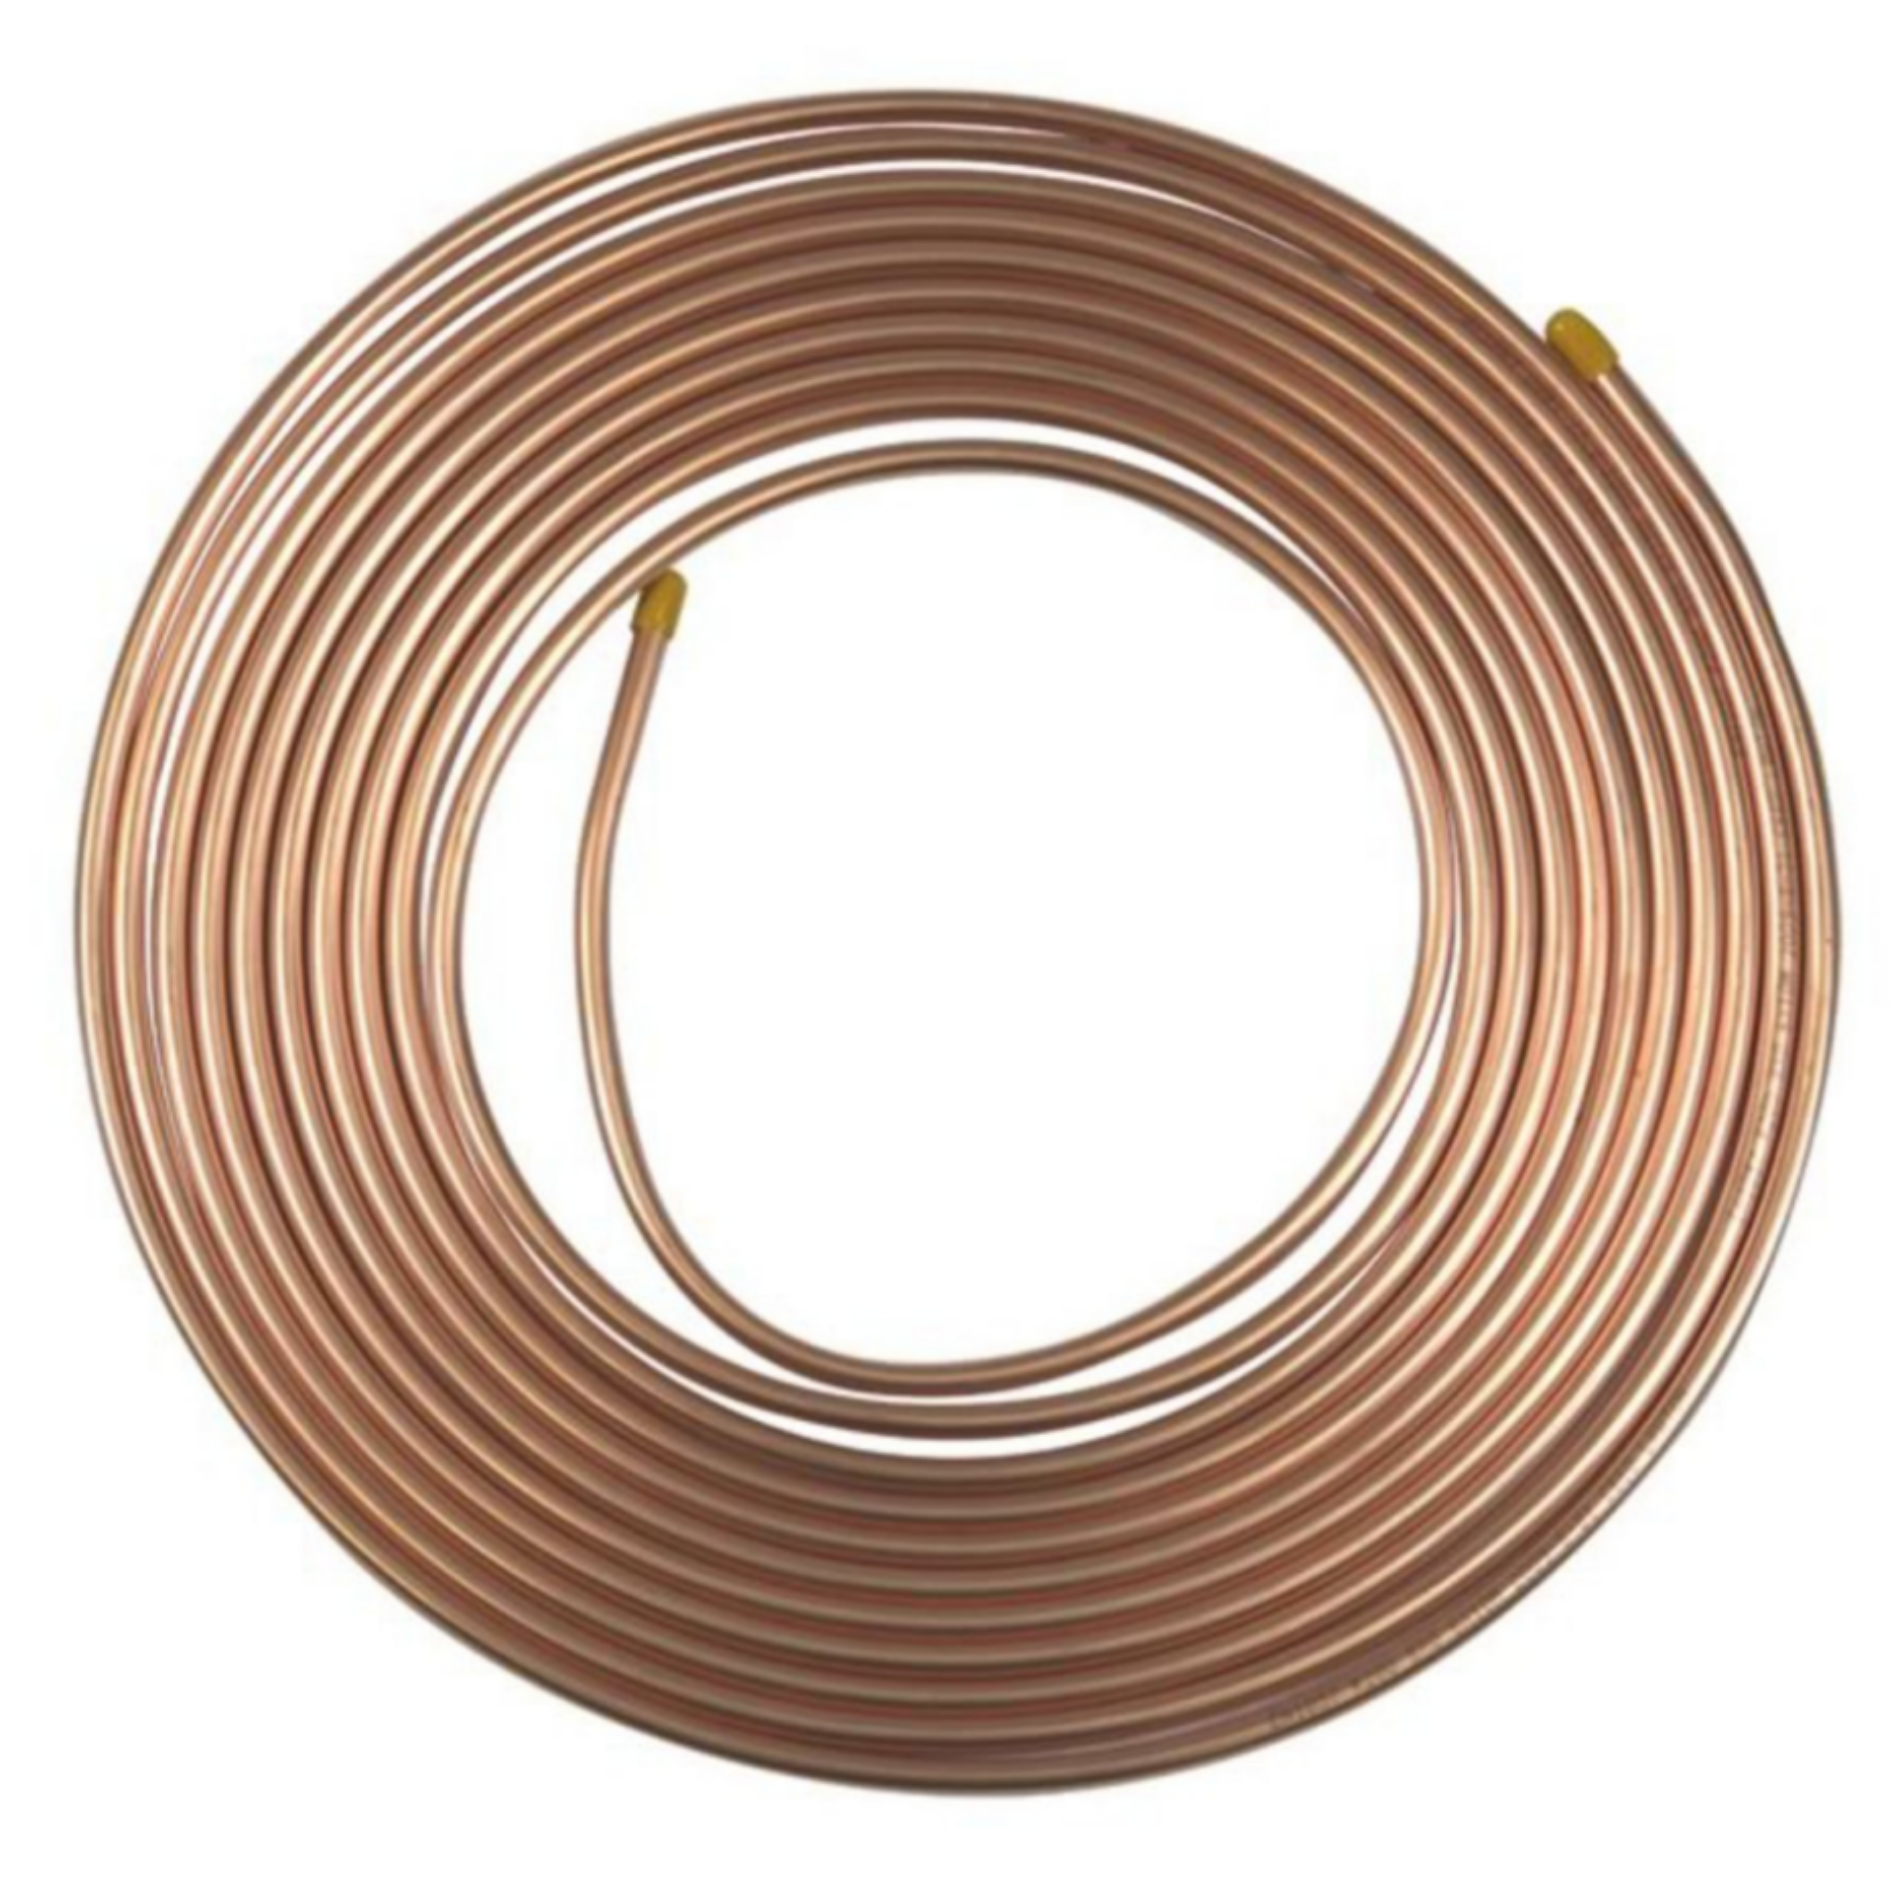 Free Postage Air Conditioning Copper Tubing 15m & 30m Avaliable BRAND NEW 